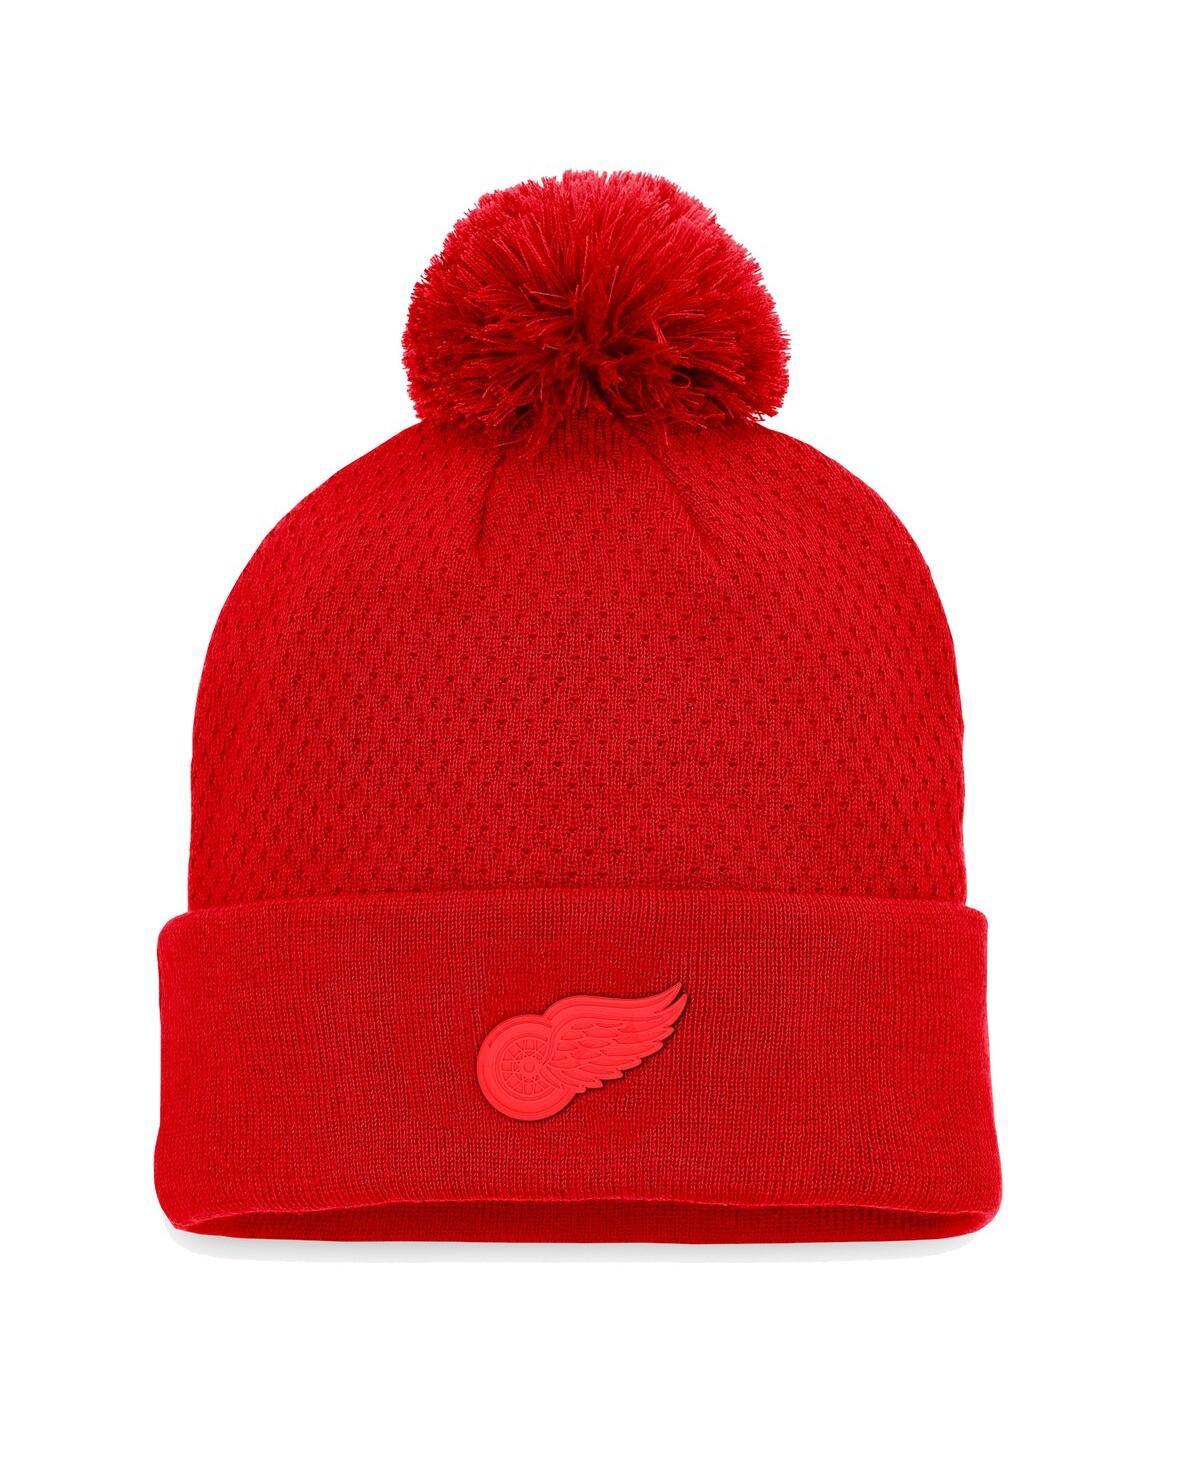 Fanatics Women's  Red Detroit Red Wings Authentic Pro Road Cuffed Knit Hat With Pom